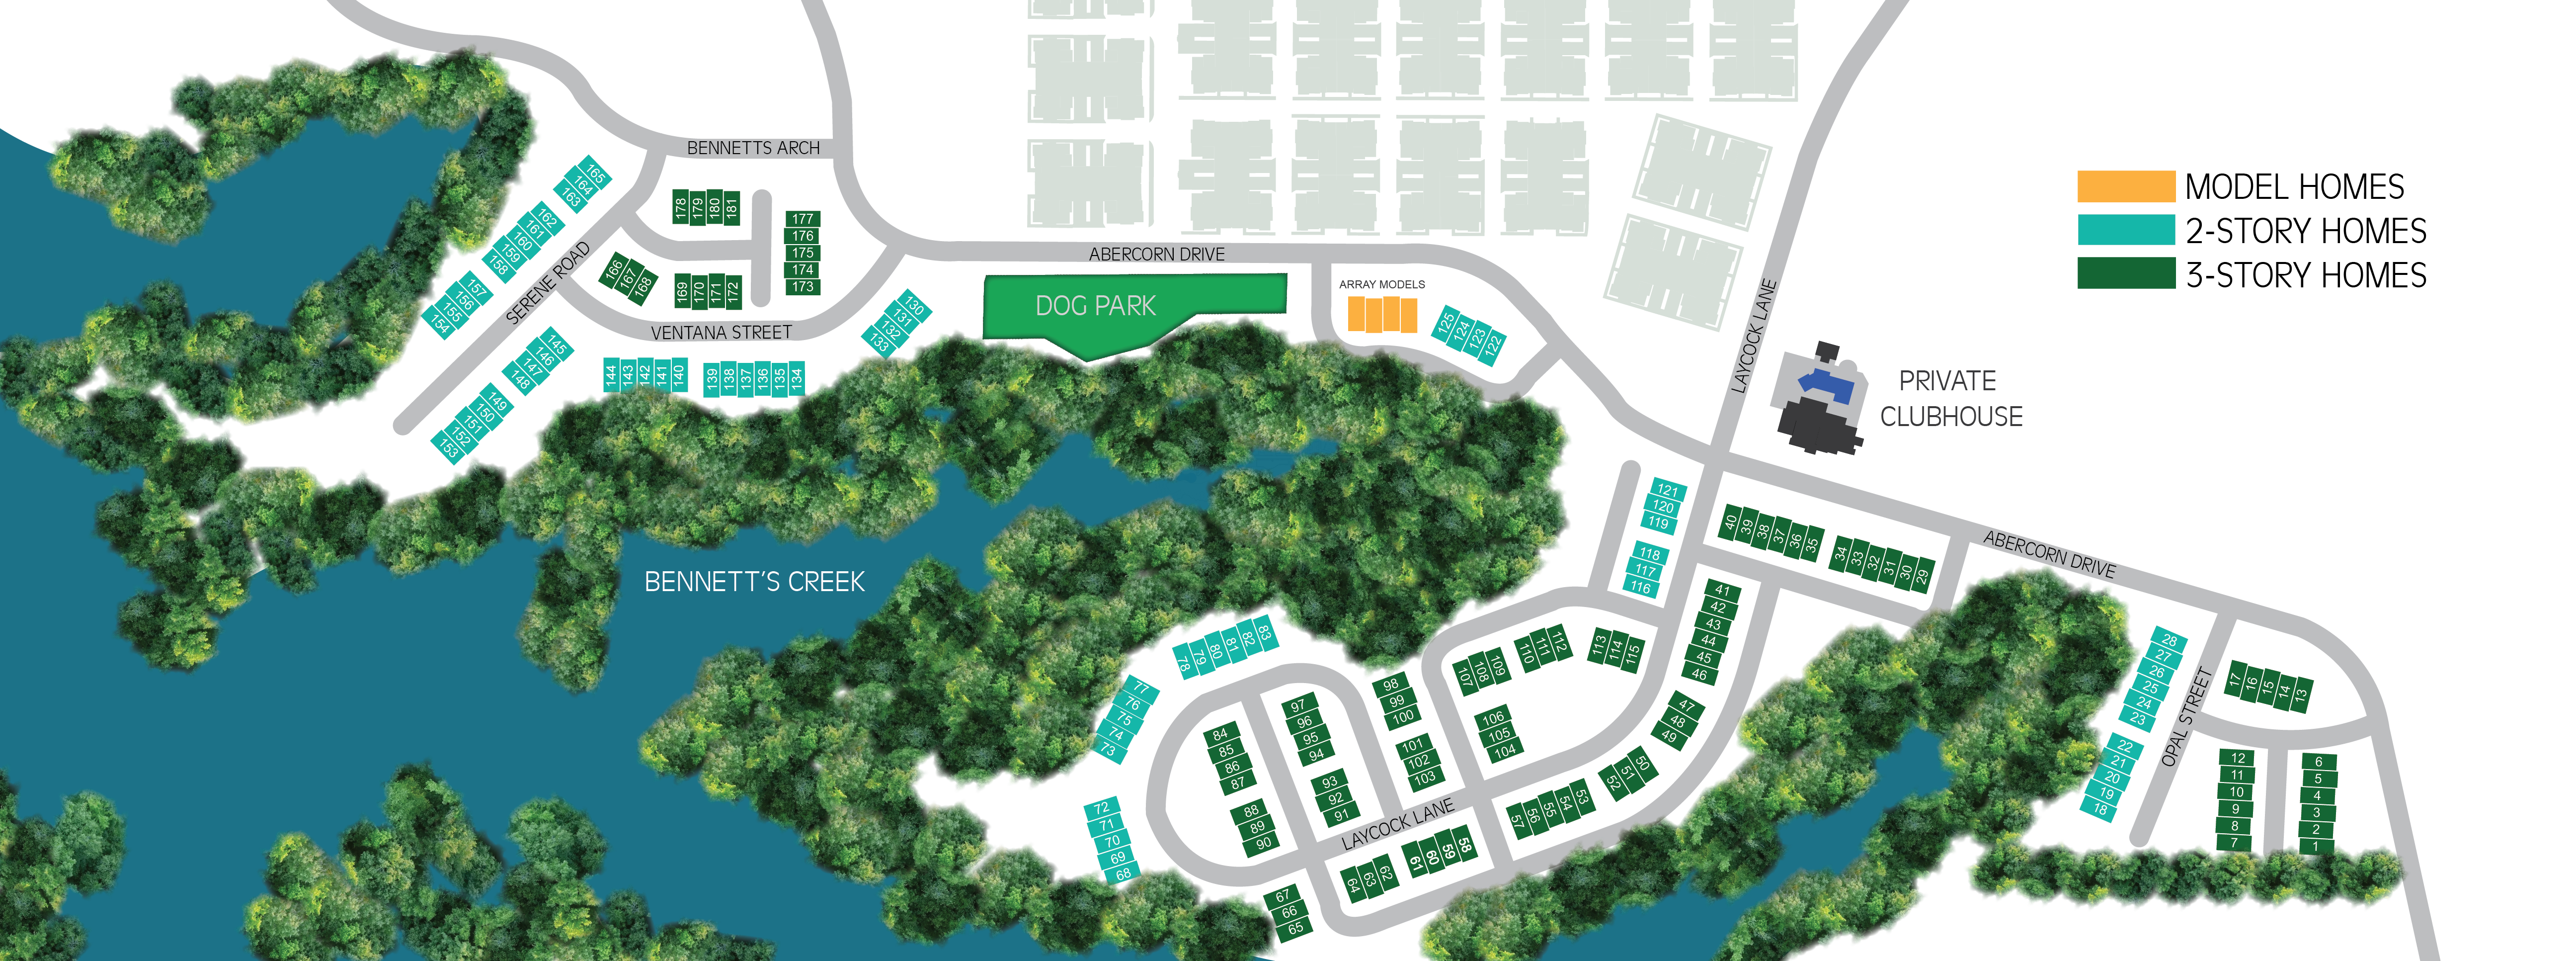 SIte Map For Array. Shows the two story units, three story units, model homes, dog park and clubhouse locations.